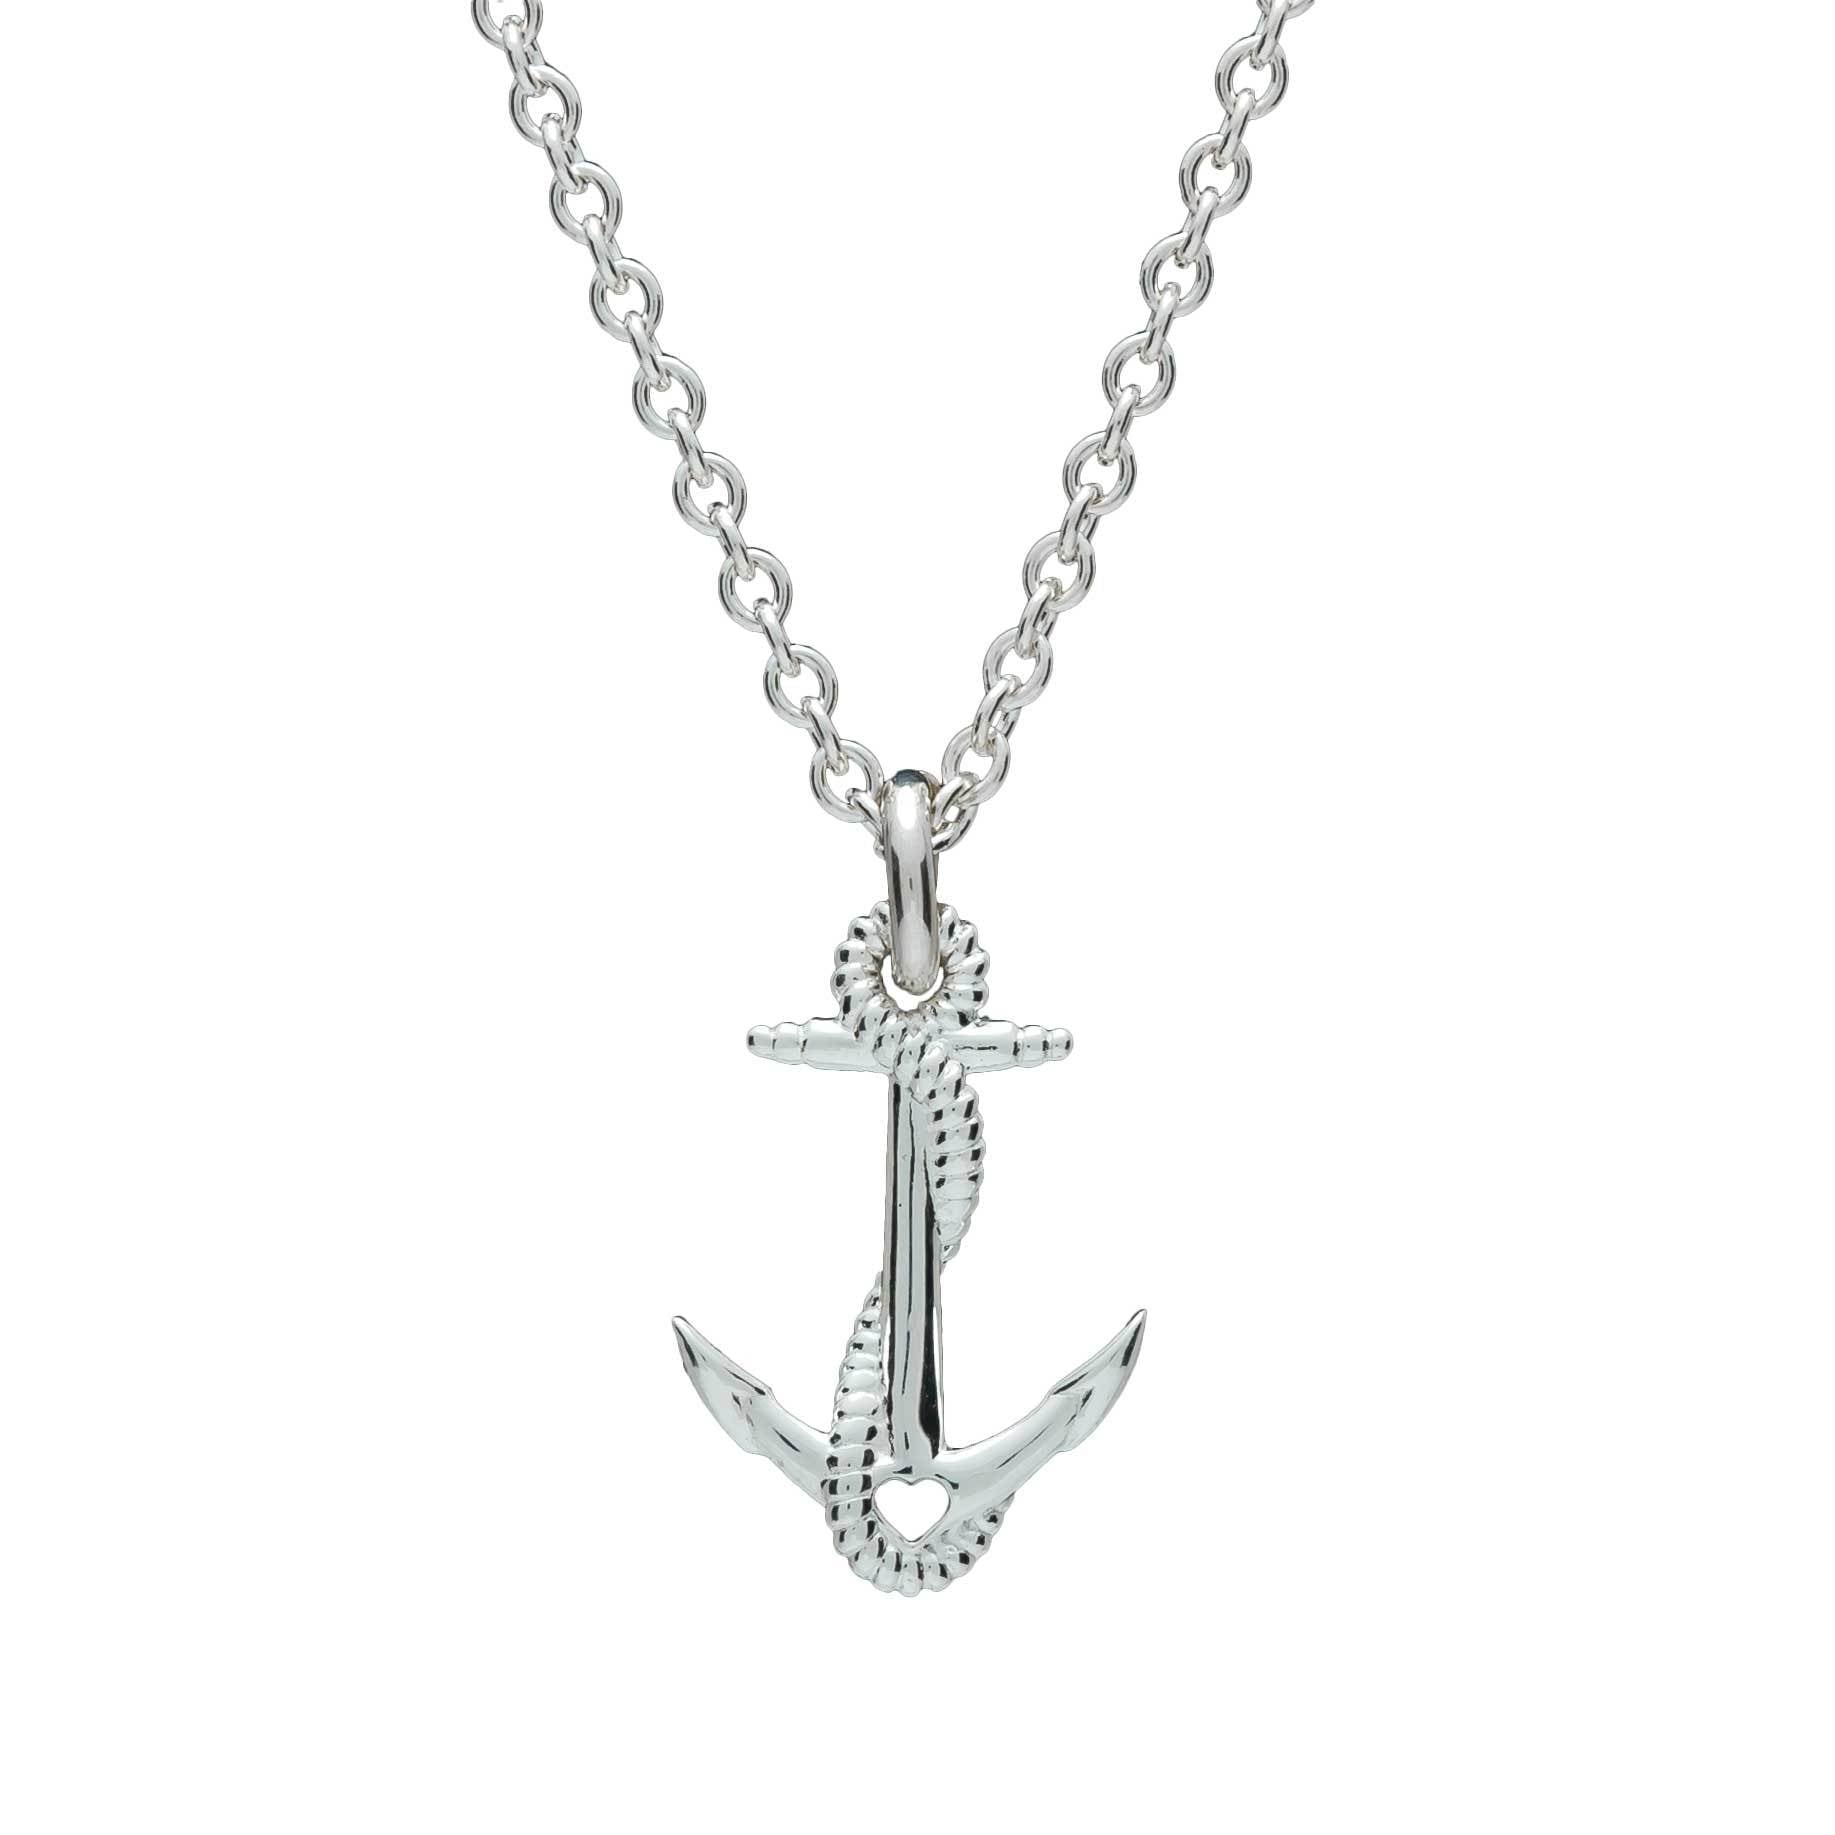 Detailed Silver Anchor Pendant with Heart Cutout